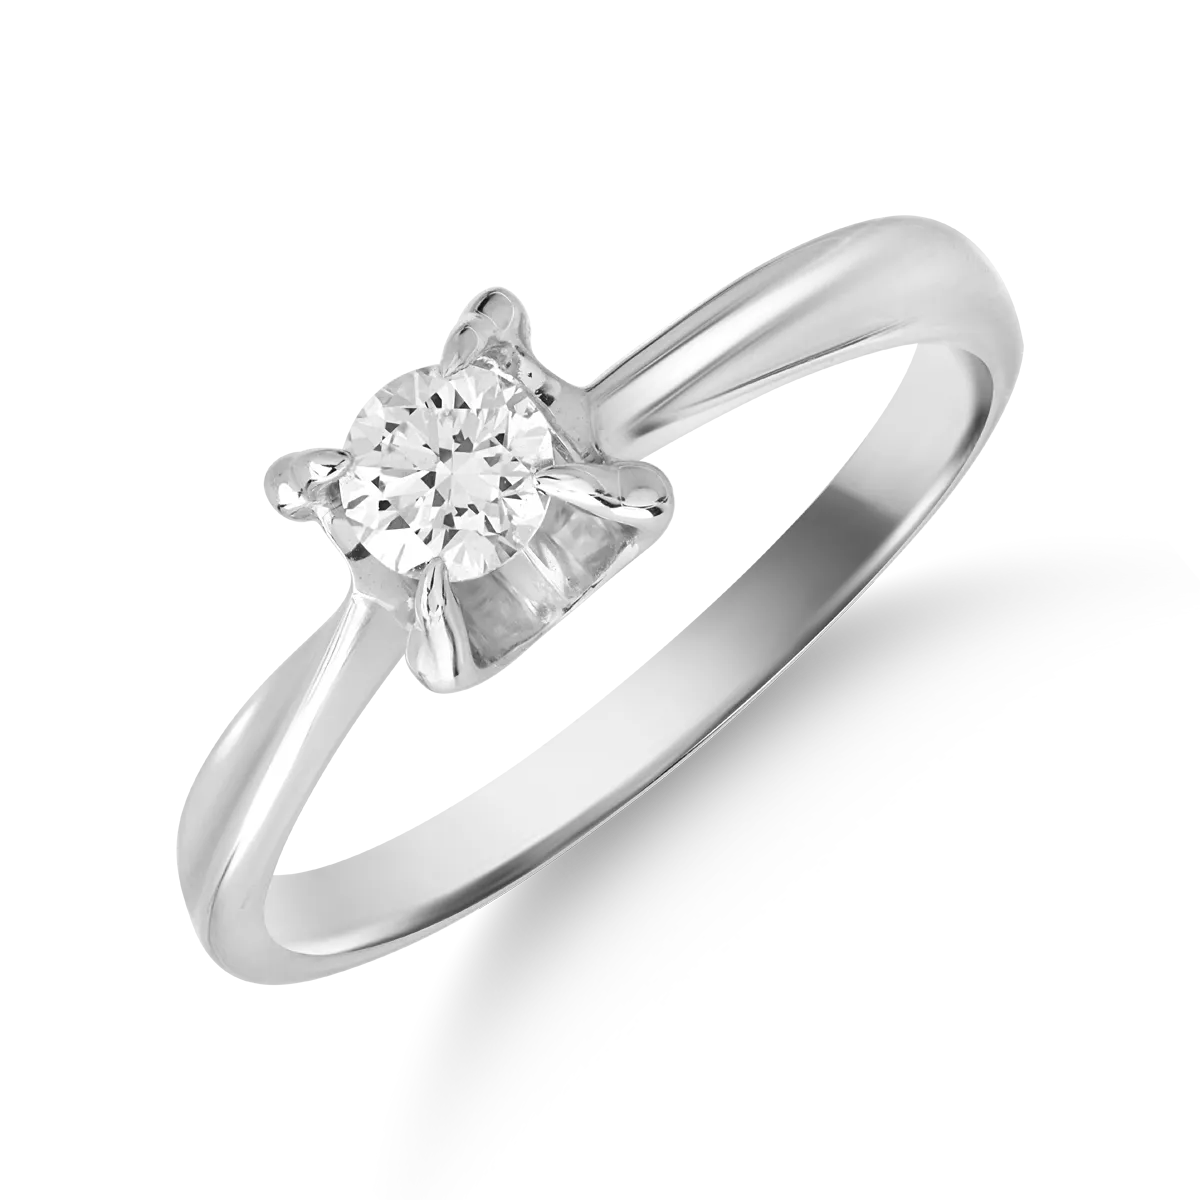 18K white gold engagement ring with a 0.18ct solitaire diamond